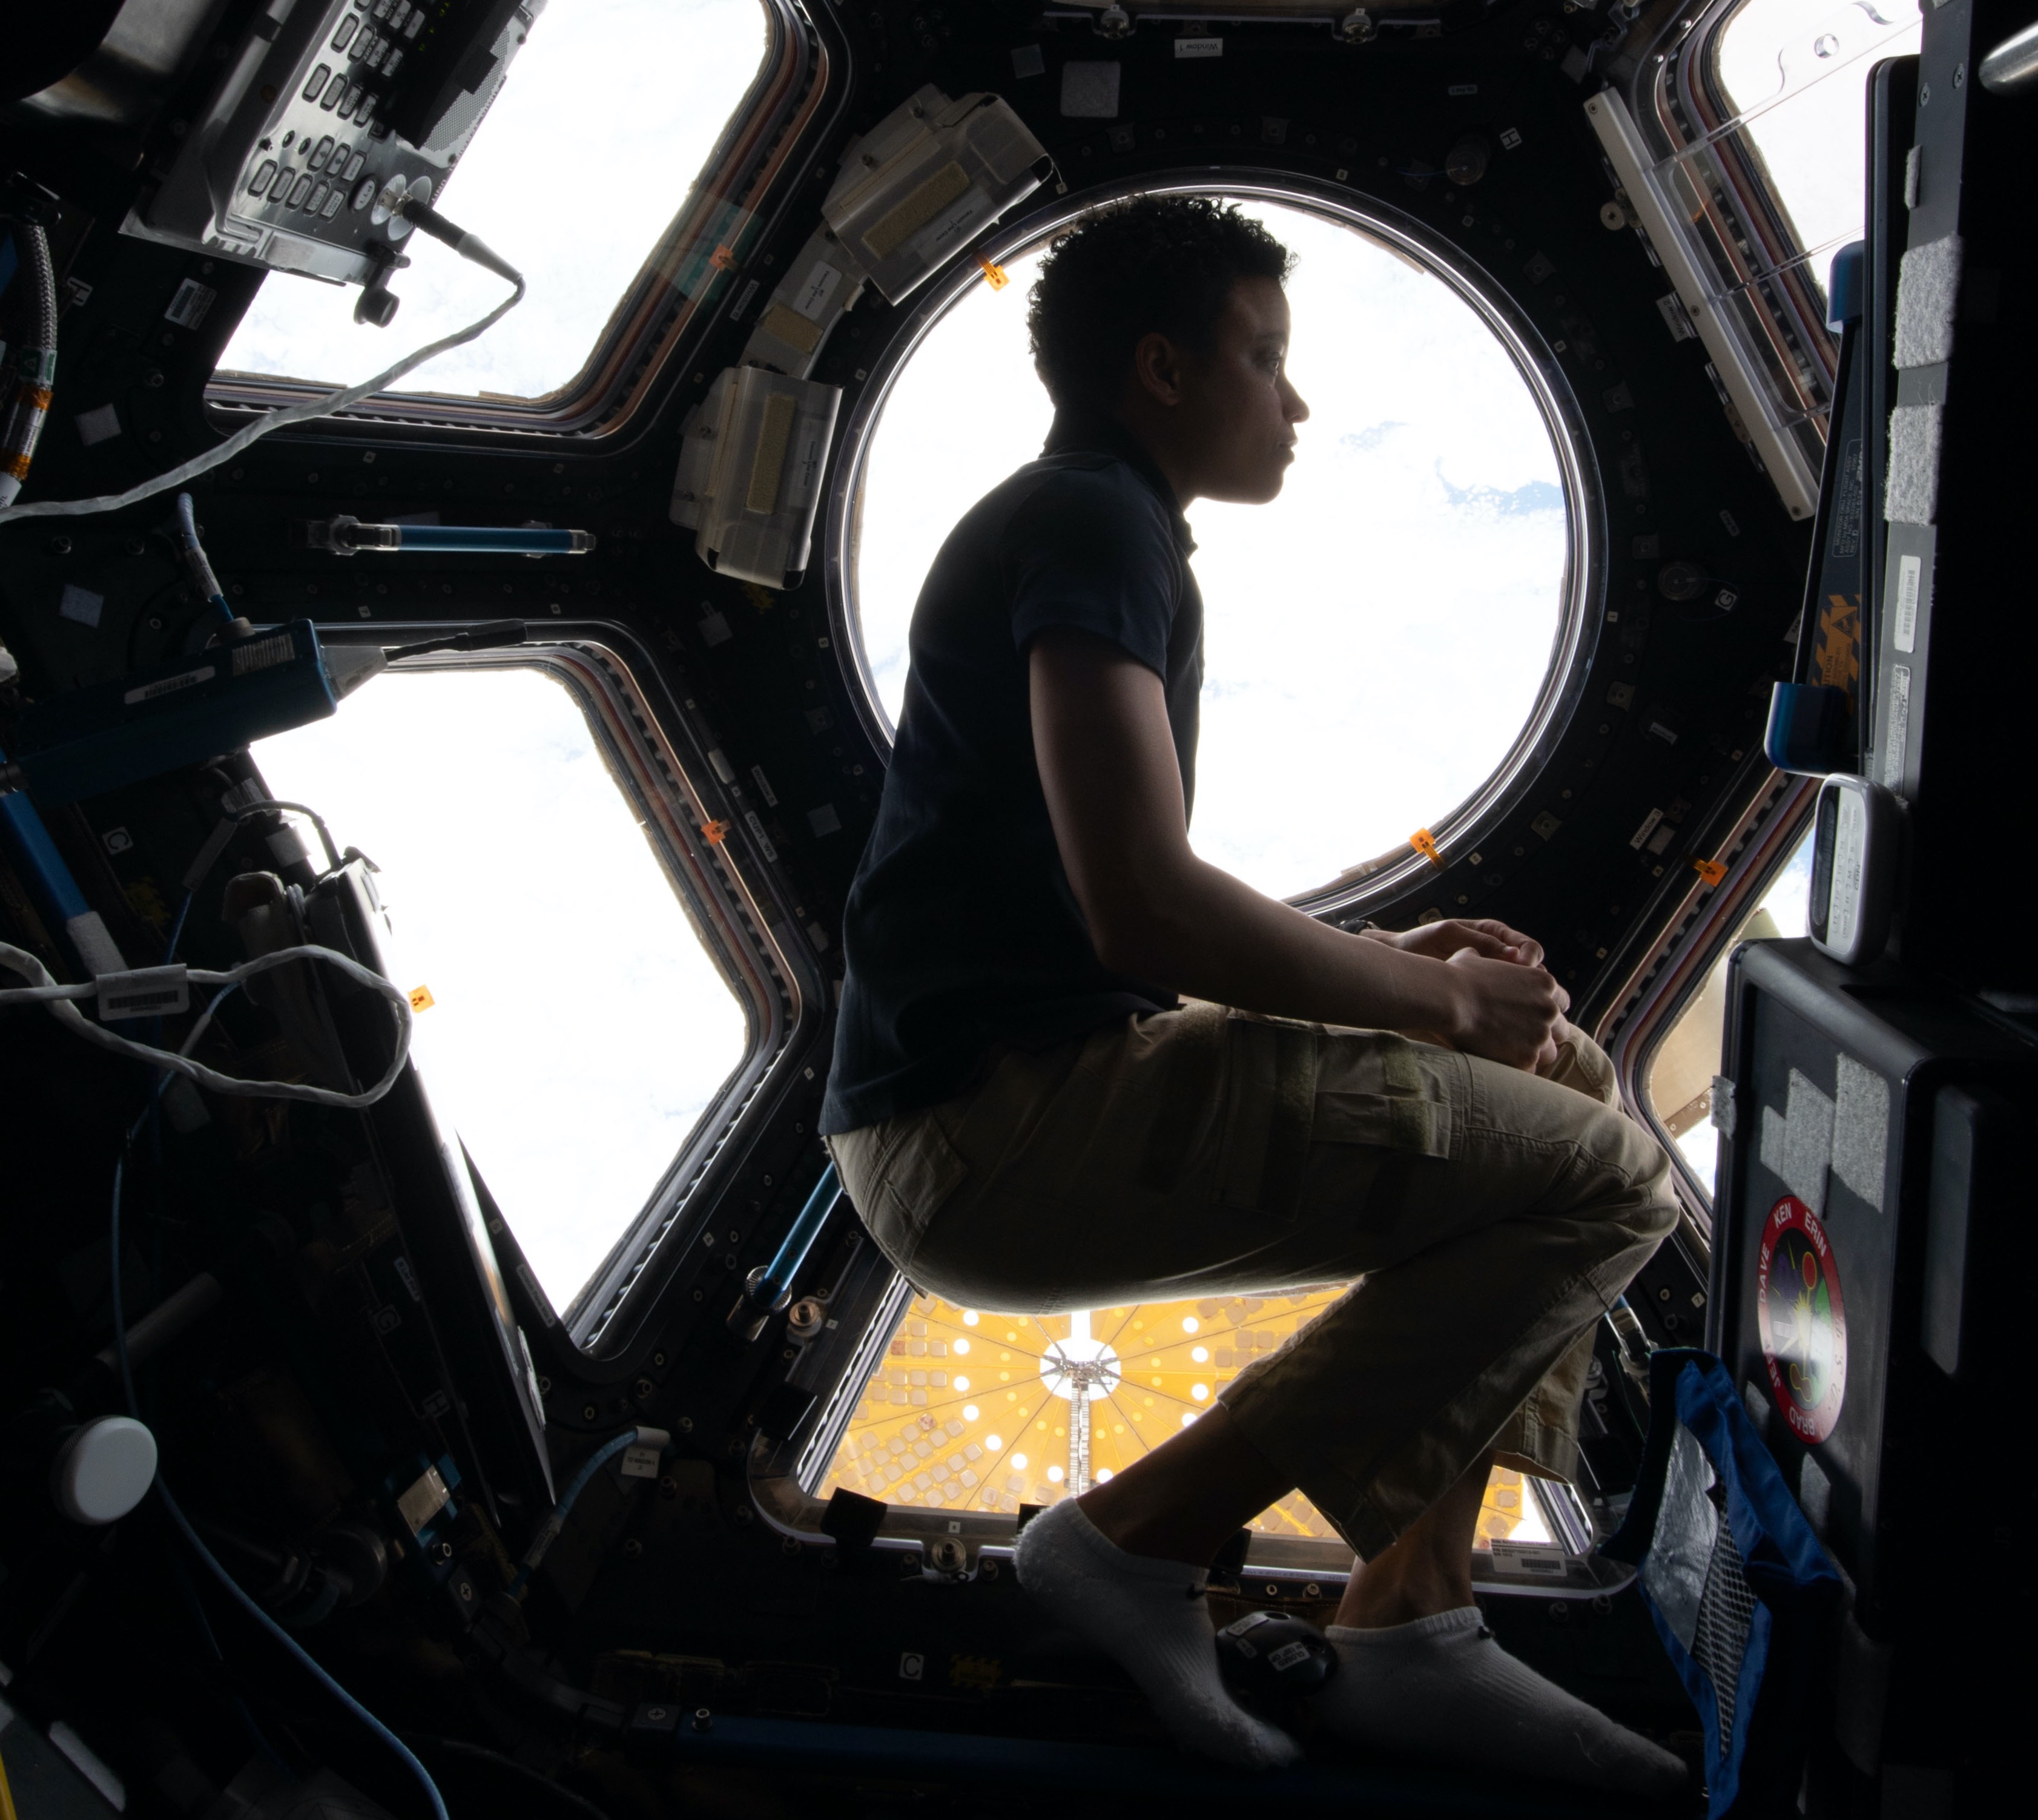 NASA astronaut Jessica Watkins floats in the dome of the International Space Station in this photo, shared by NASA on May 9, 2022.